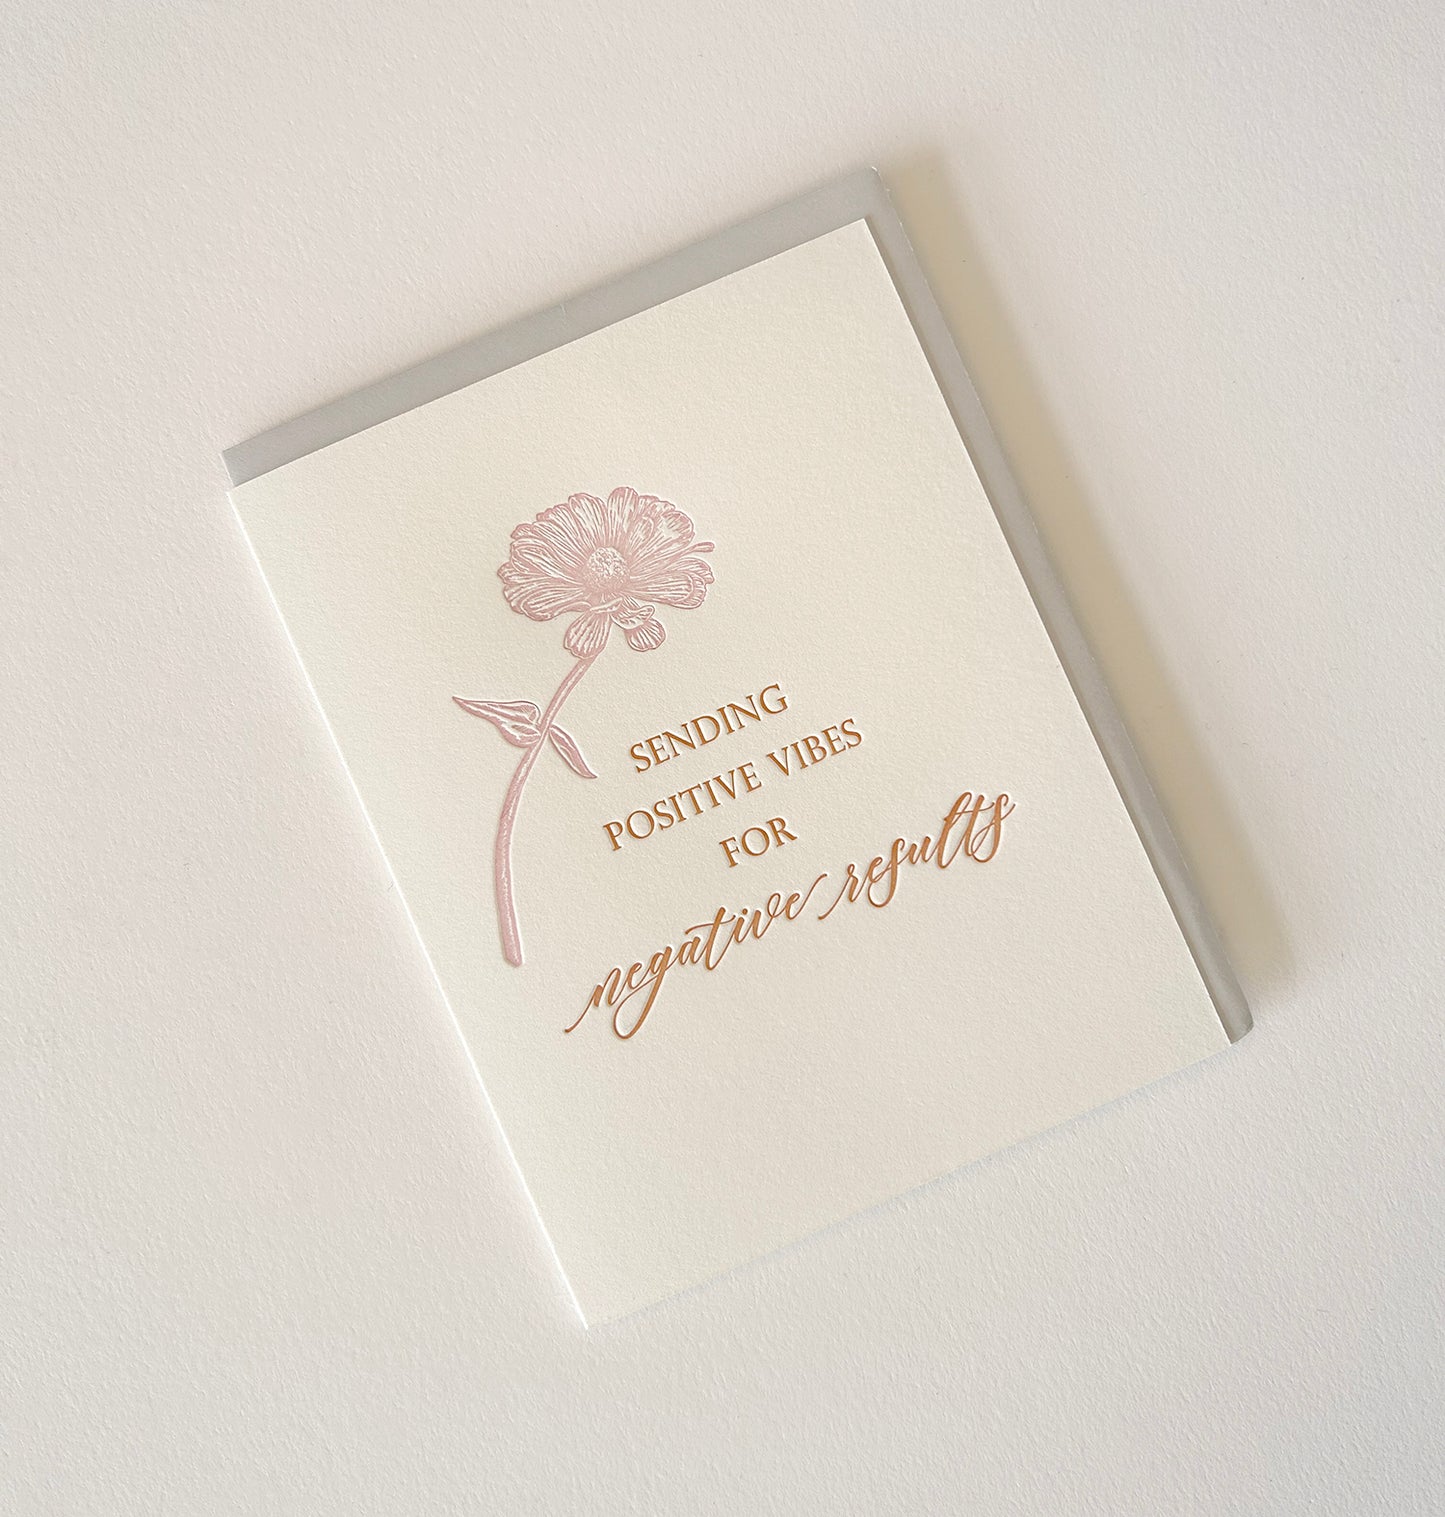 Letterpress friendship card with flower that says "Sending positive vibes for negative results" by Rust Belt Love